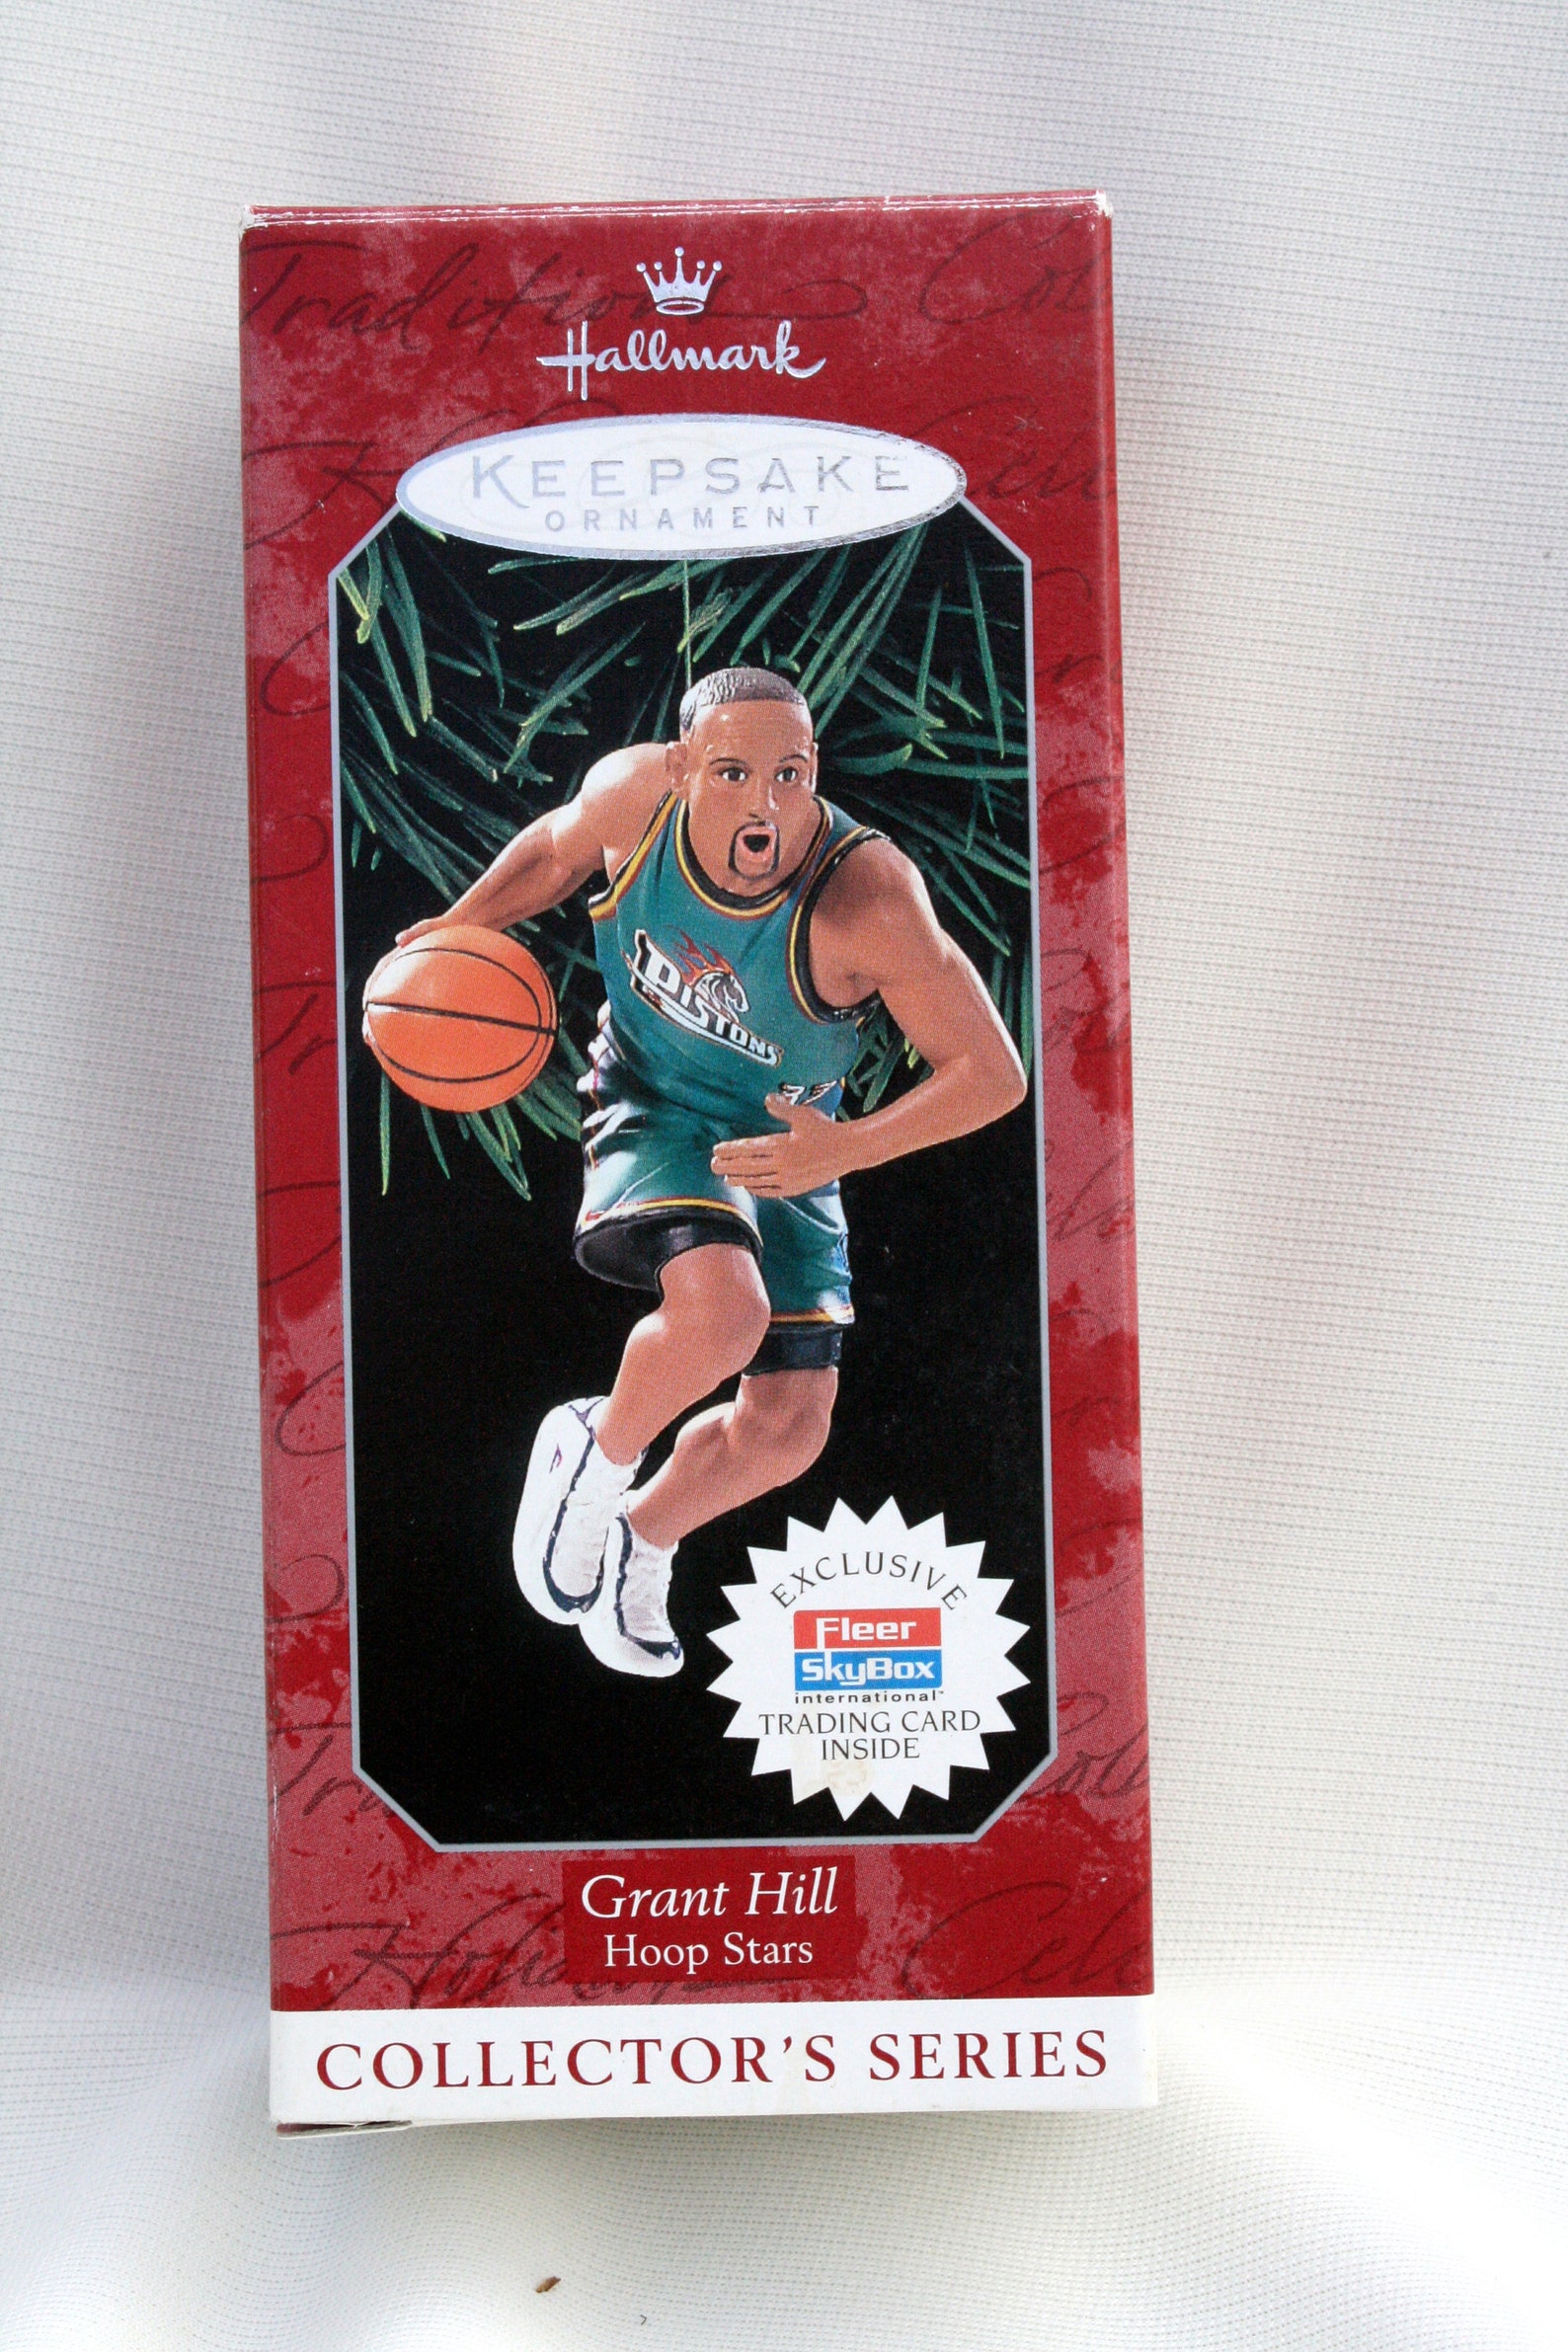 Grant Hill Ornament and Trading Card Grant Hill Collectors | Etsy